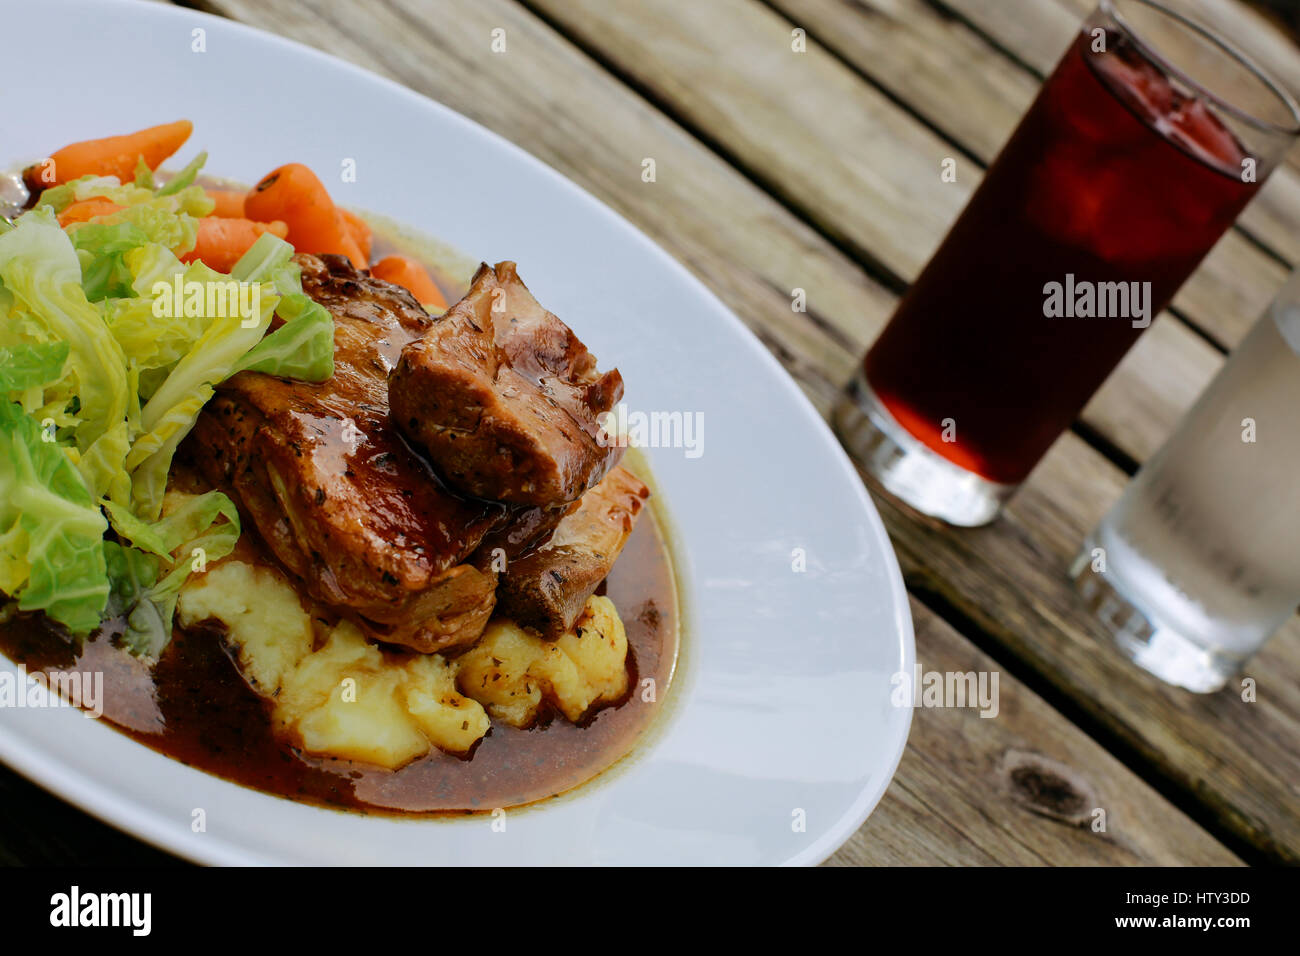 Lamb shank with vegetables on an pub outdoor wooden table Stock Photo